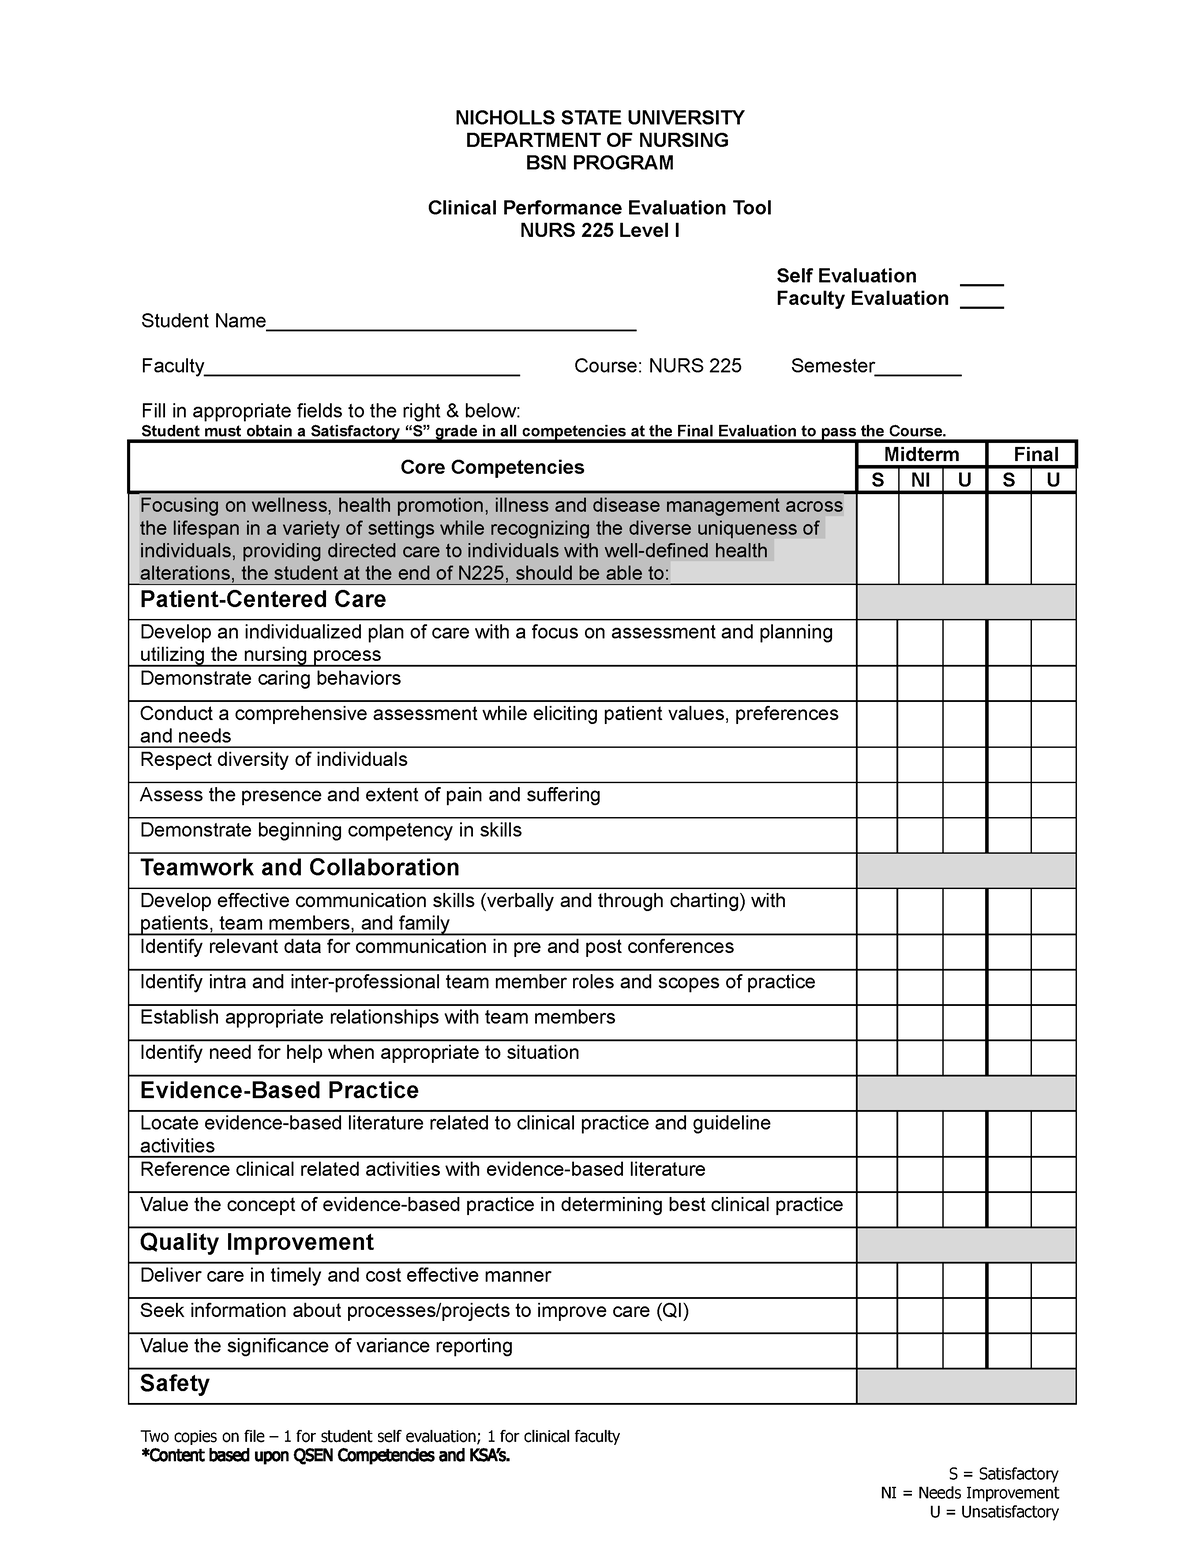 Level I N225 Clinical Eval Tool - NICHOLLS STATE UNIVERSITY DEPARTMENT ...